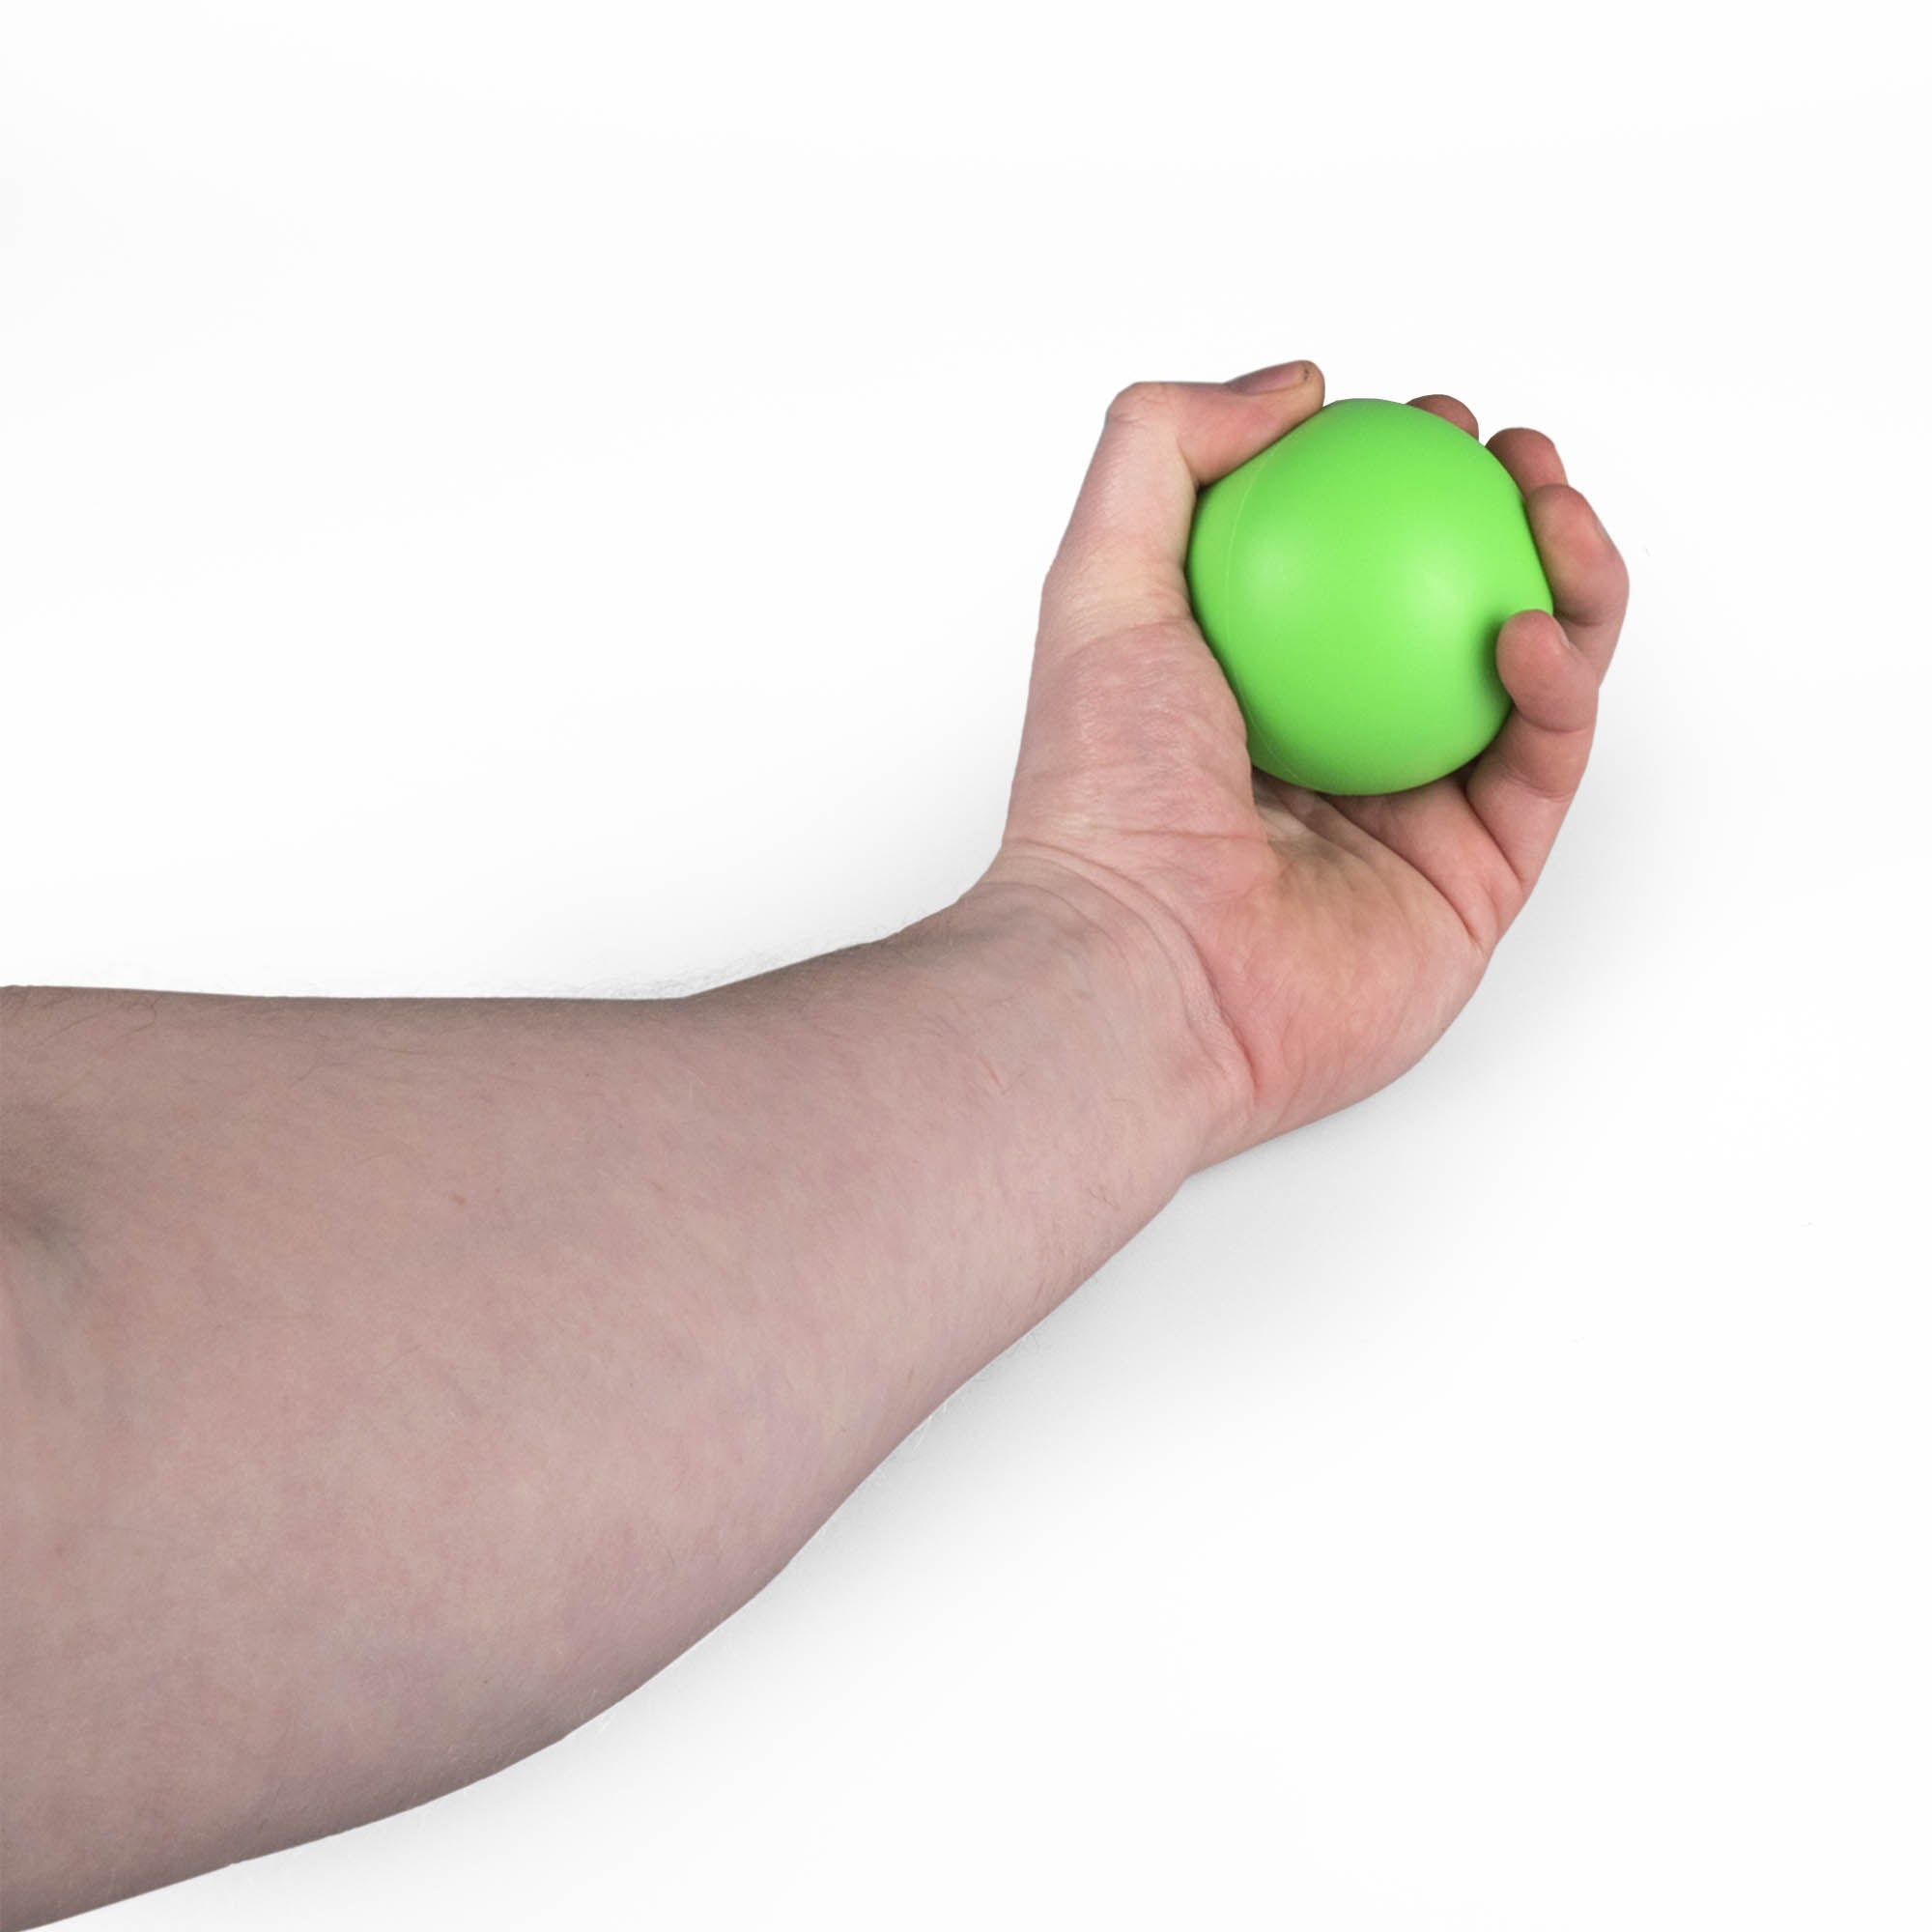 MMX 67mm juggling ball green in hand